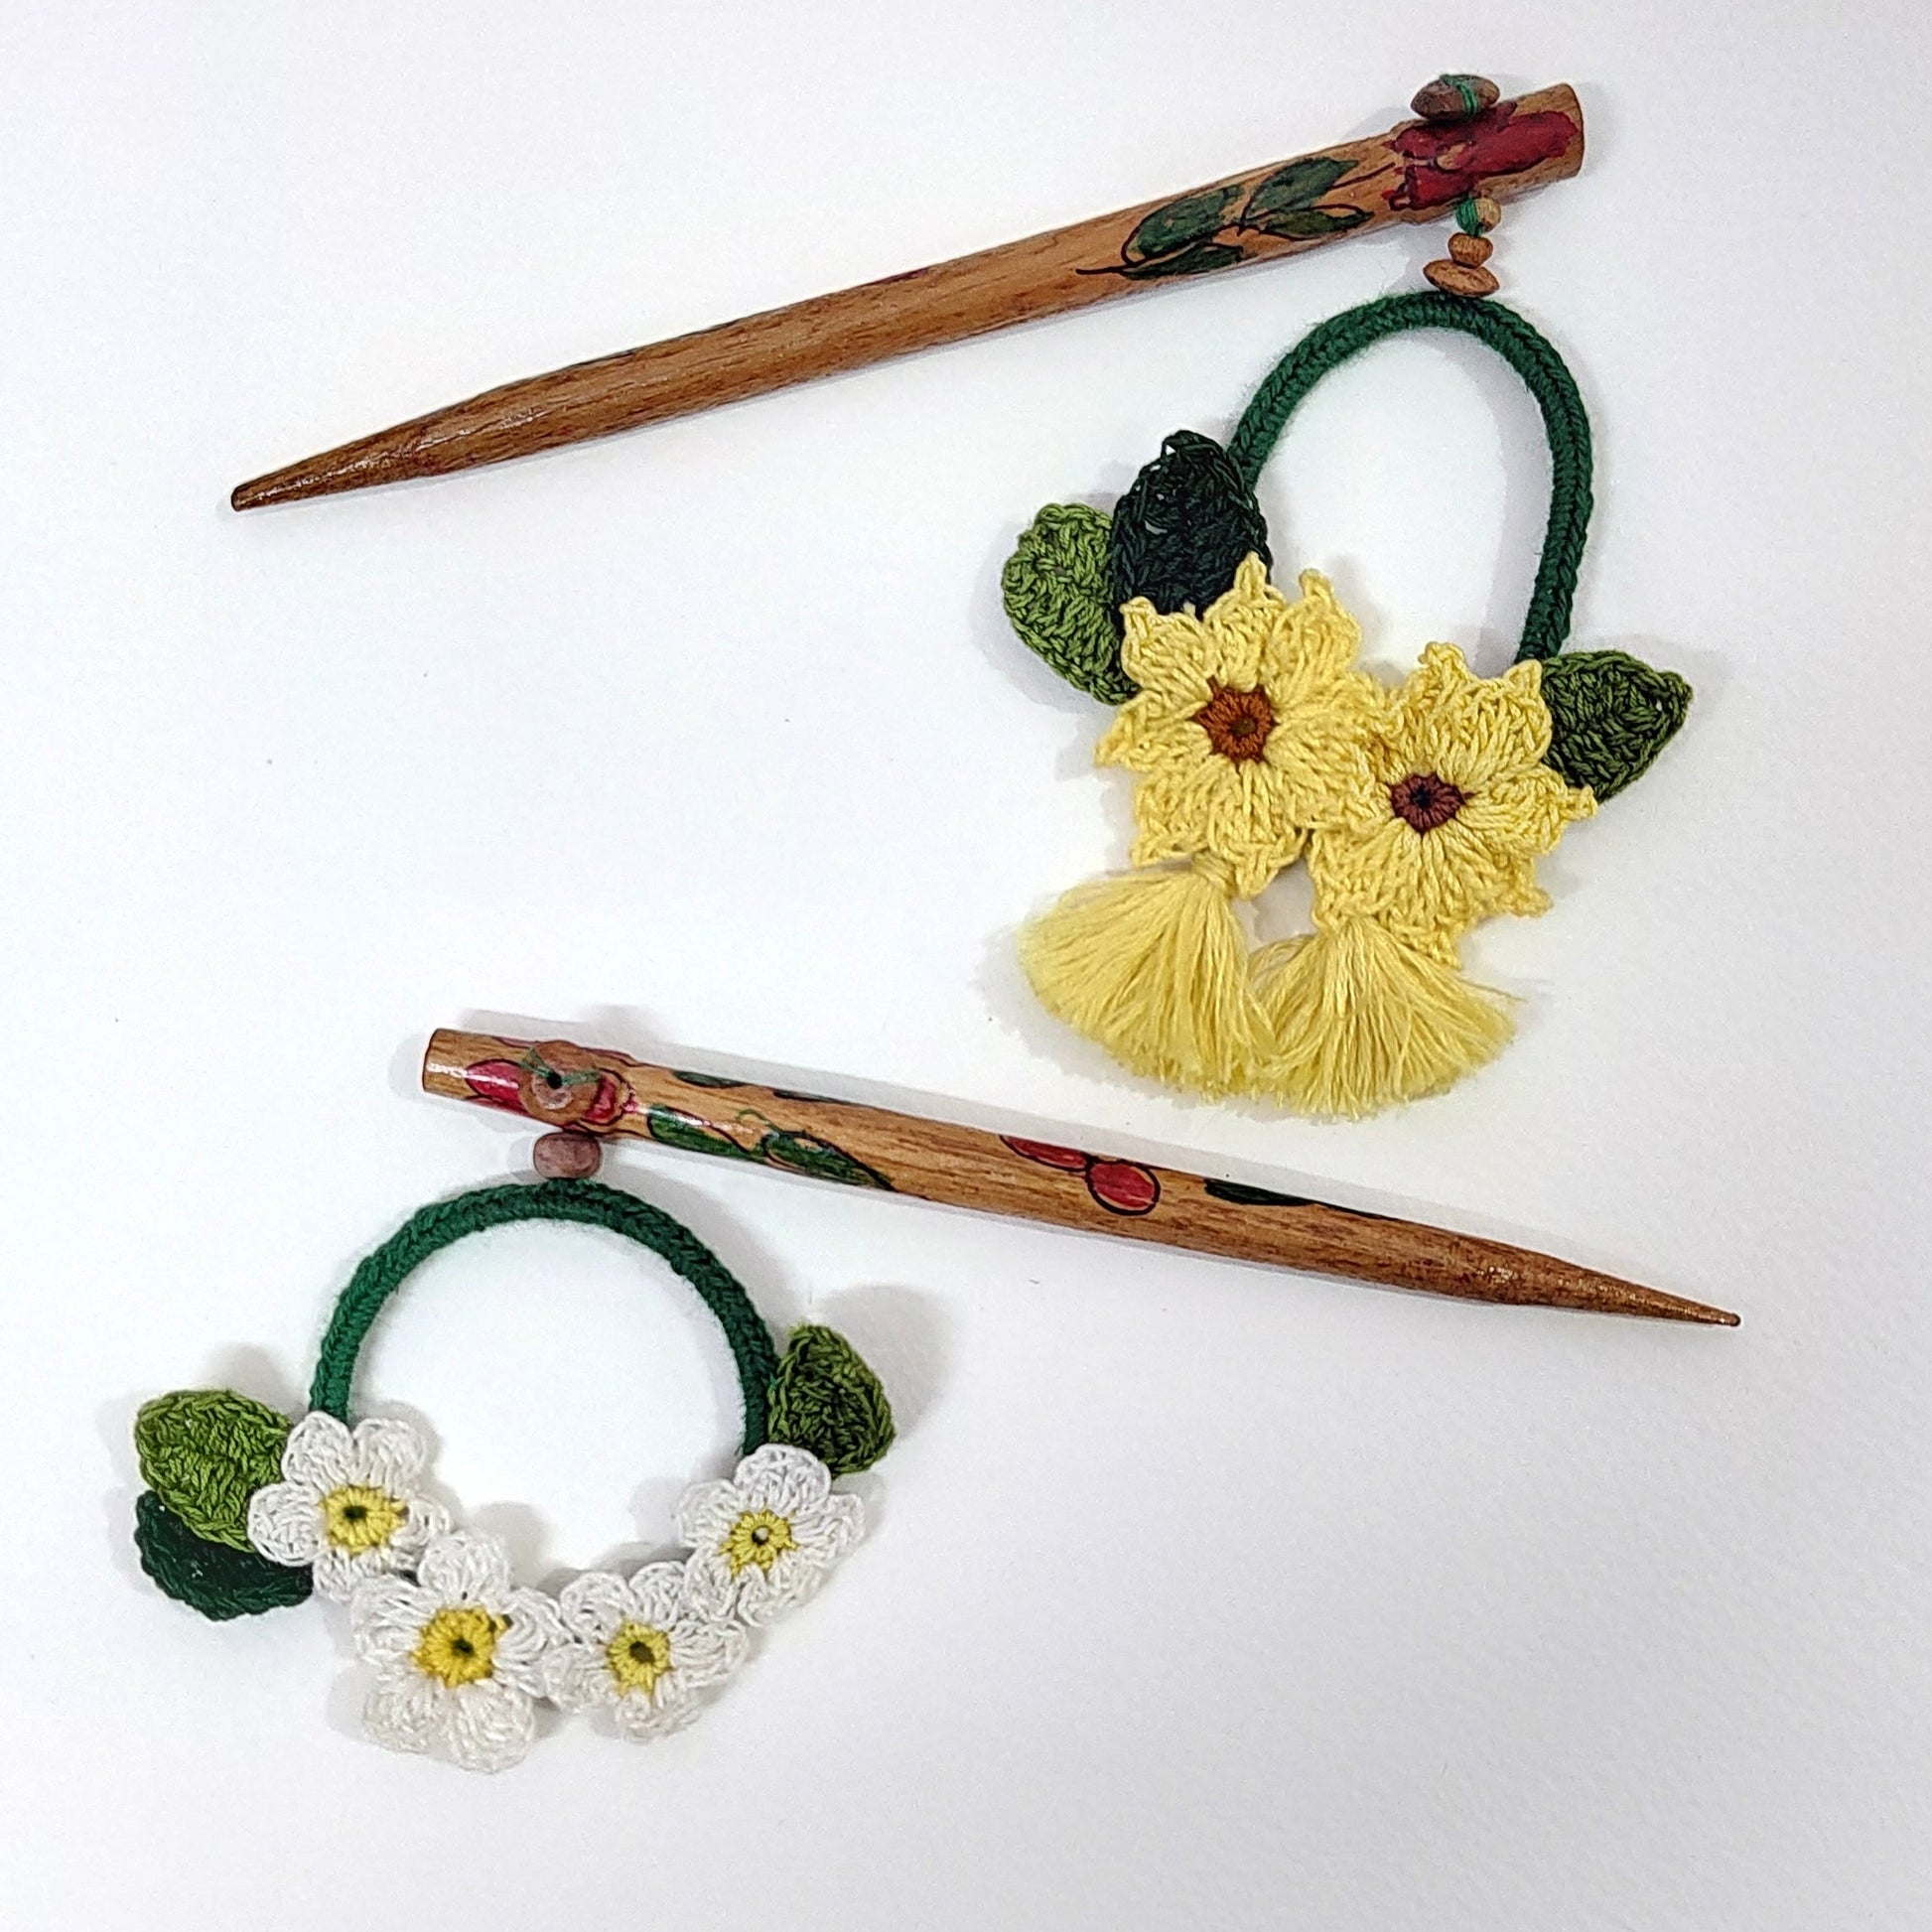 Wooden Hair Stick Yellow And Off White at Kamakhyaa by Ikriit'm. This item is Accessories, Cotton Yarn, Hair Accessory, Ikriit'm, Off White, Wood, Yellow